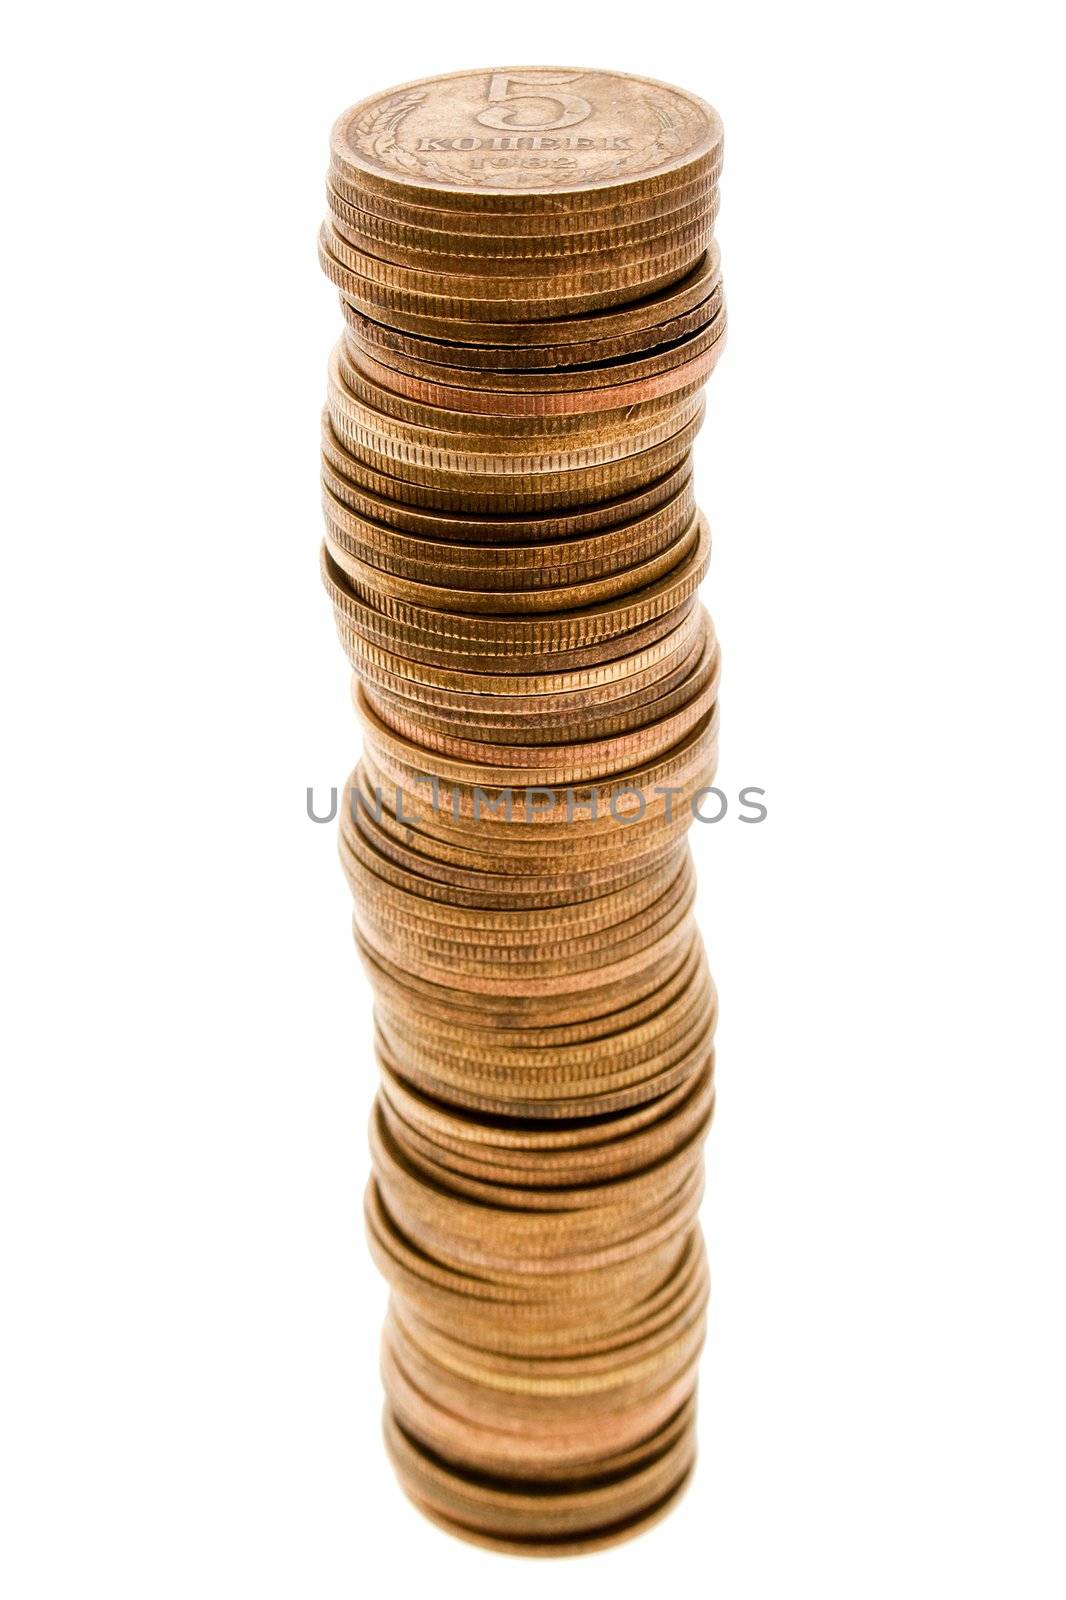 Currency coin backgrounds - finance wealth growth